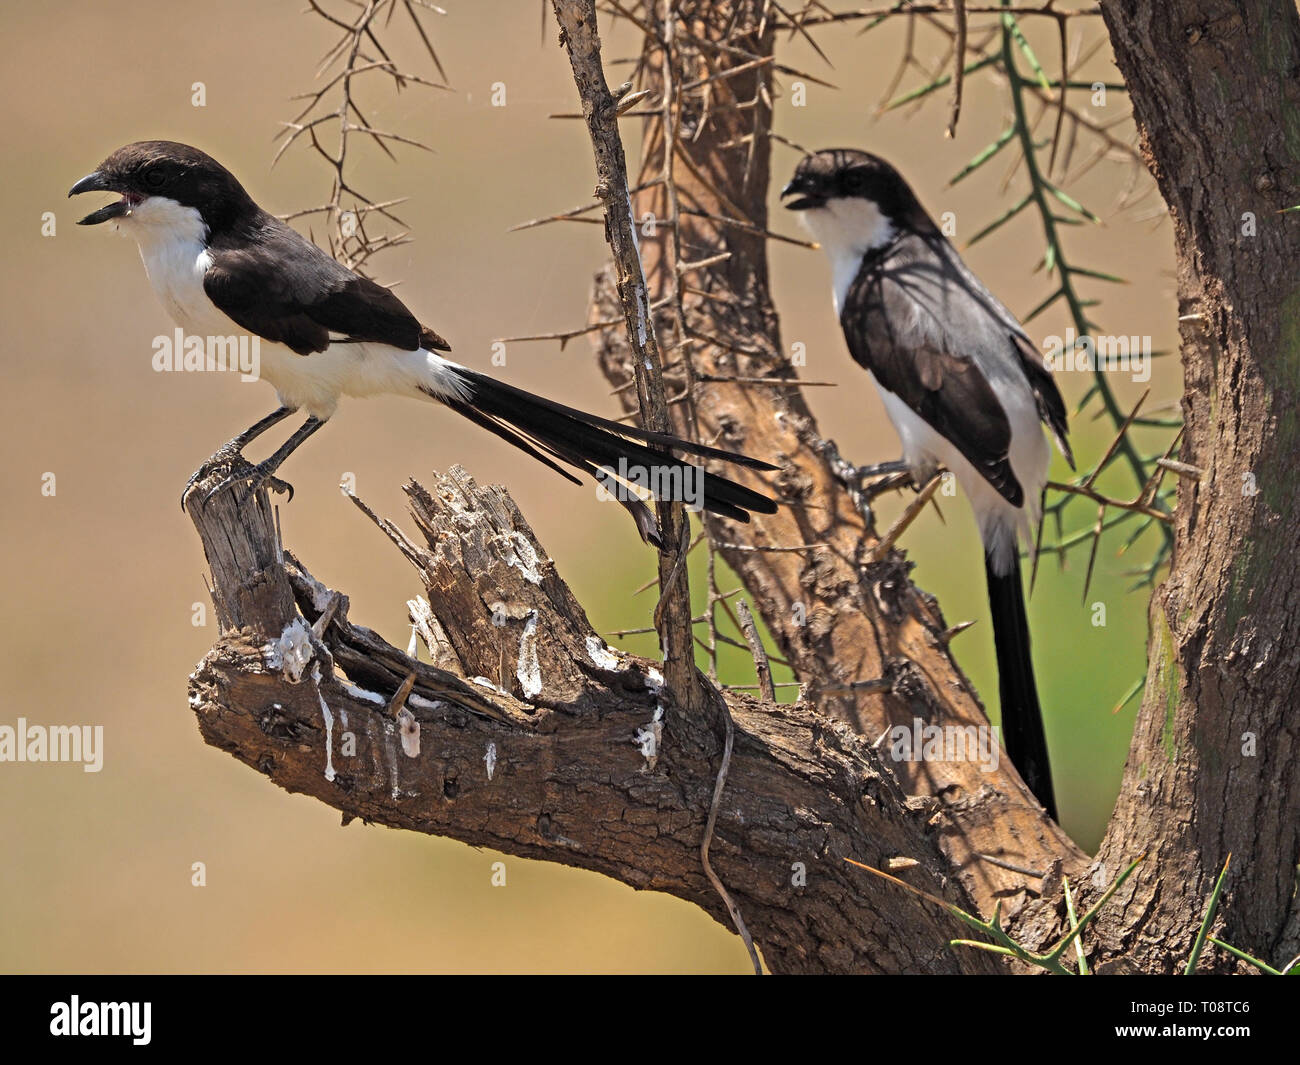 breeding pair of Long-tailed Fiscals (Lanius cabanisi) calling from soiled regular perch in Acacia Thorn Tree in Amboseli NP, Kenya, Africa Stock Photo